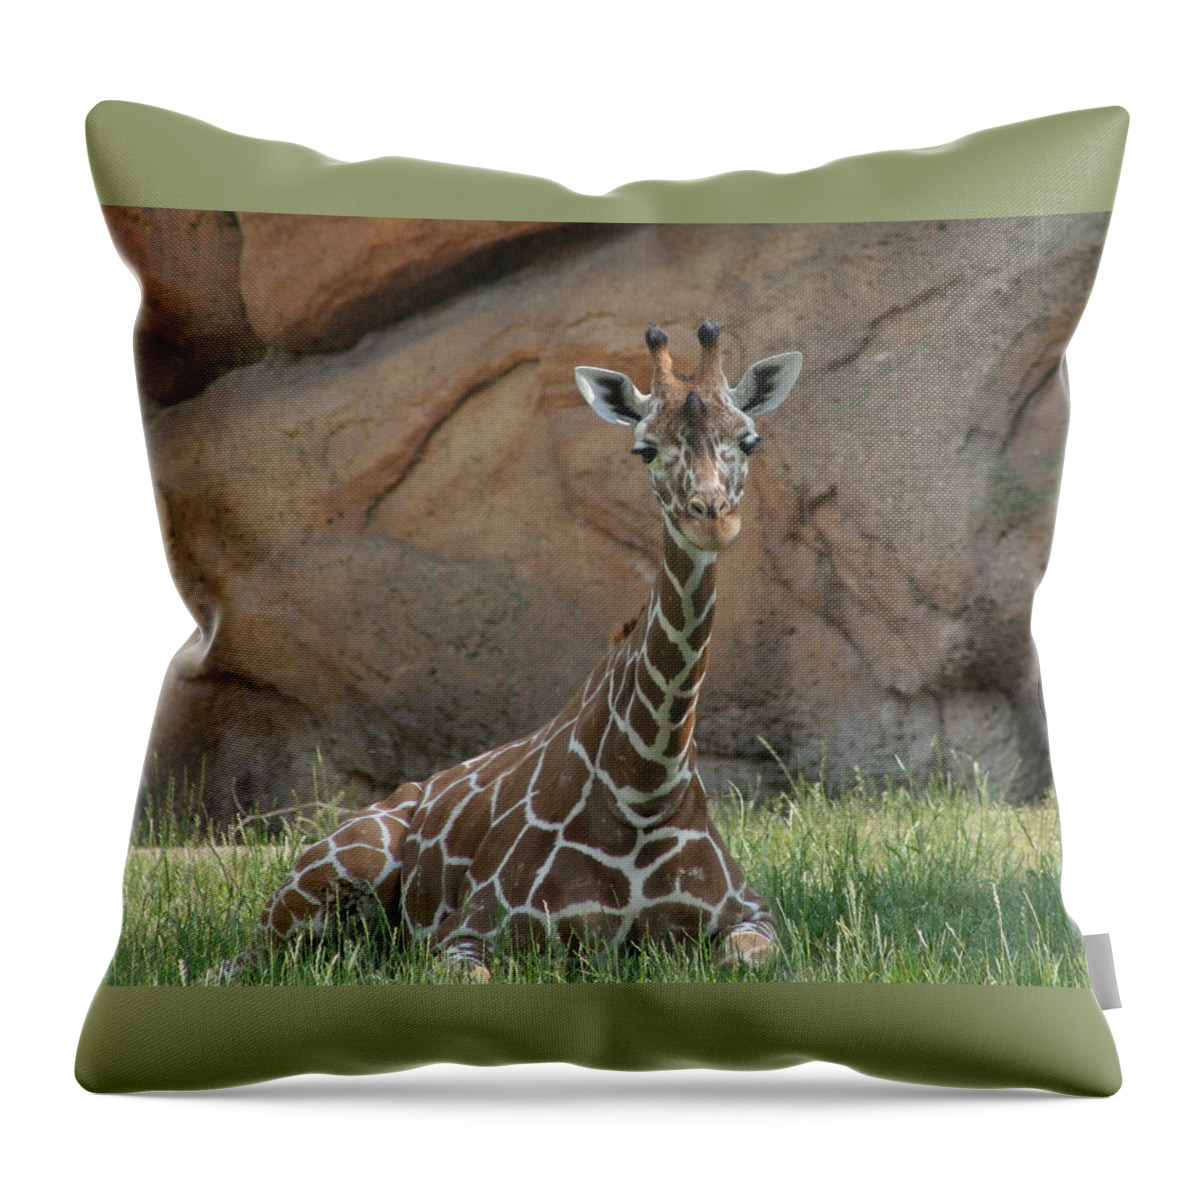 Nashville Zoo Throw Pillow featuring the photograph Young Masai Giraffe by Valerie Collins